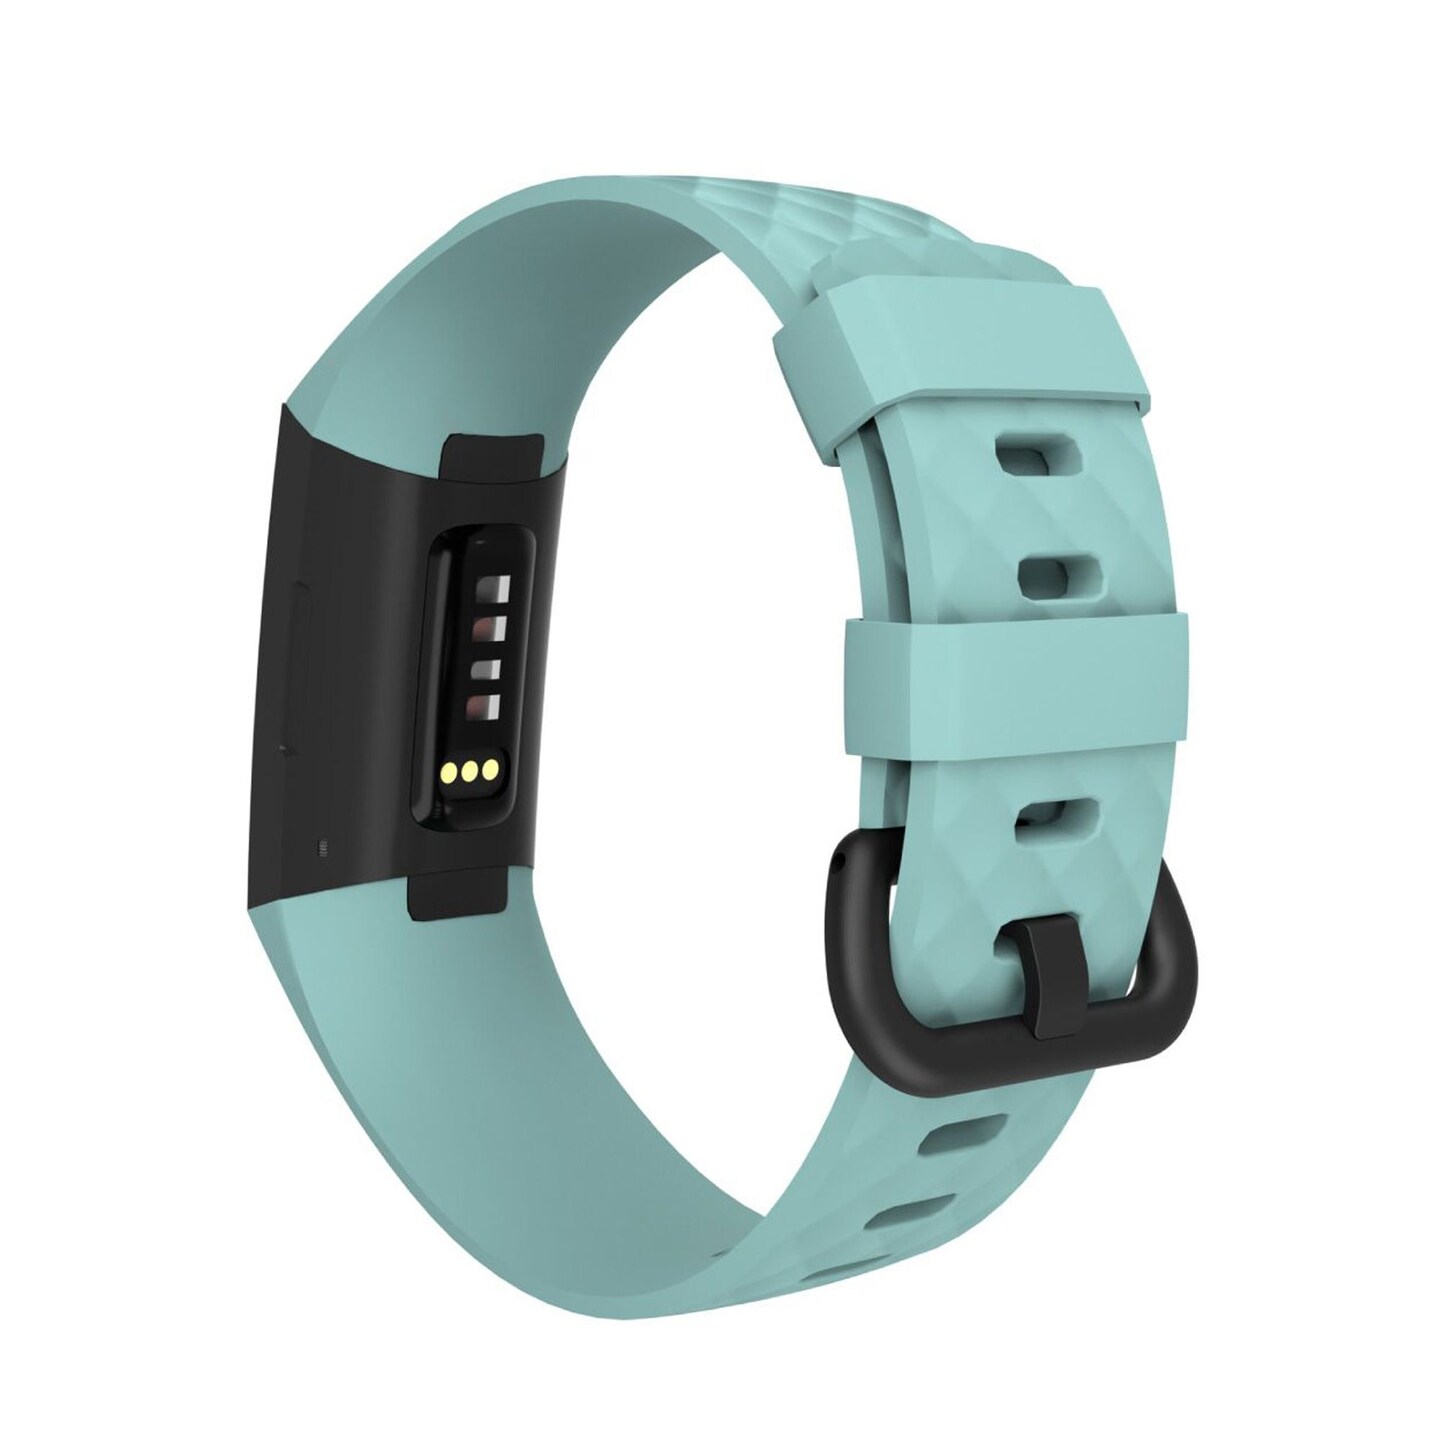 Zodaca Silicone Watch Band Compatible with Fitbit Charge 3, Charge 3 SE (Large), and Charge 4, Fitness Tracker Replacement Bands, Mint Green